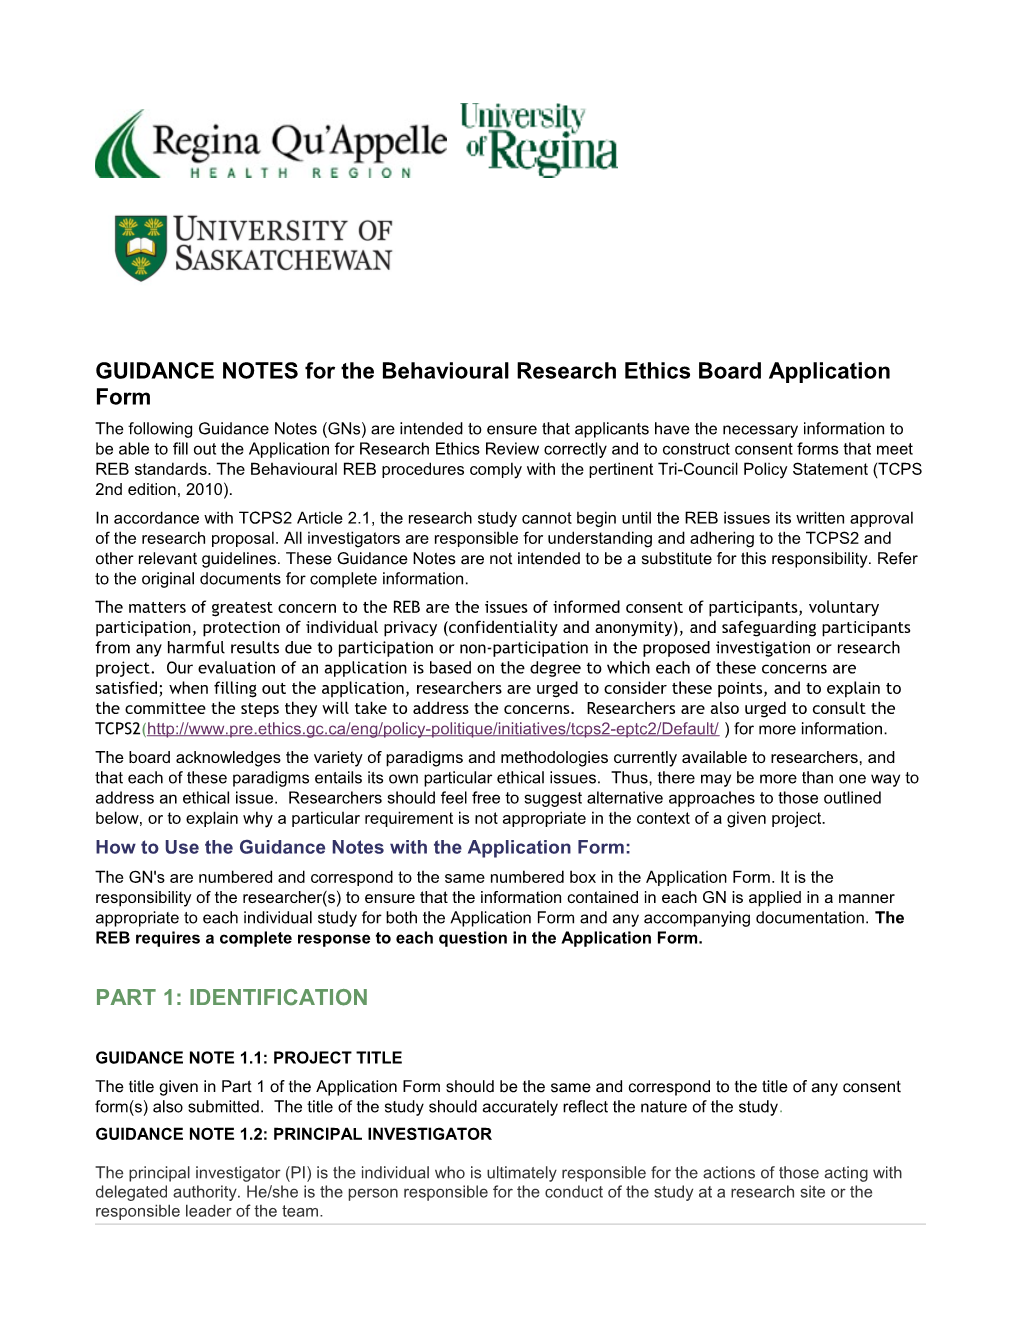 GUIDANCE NOTES for the Behavioural Research Ethics Board Application Form